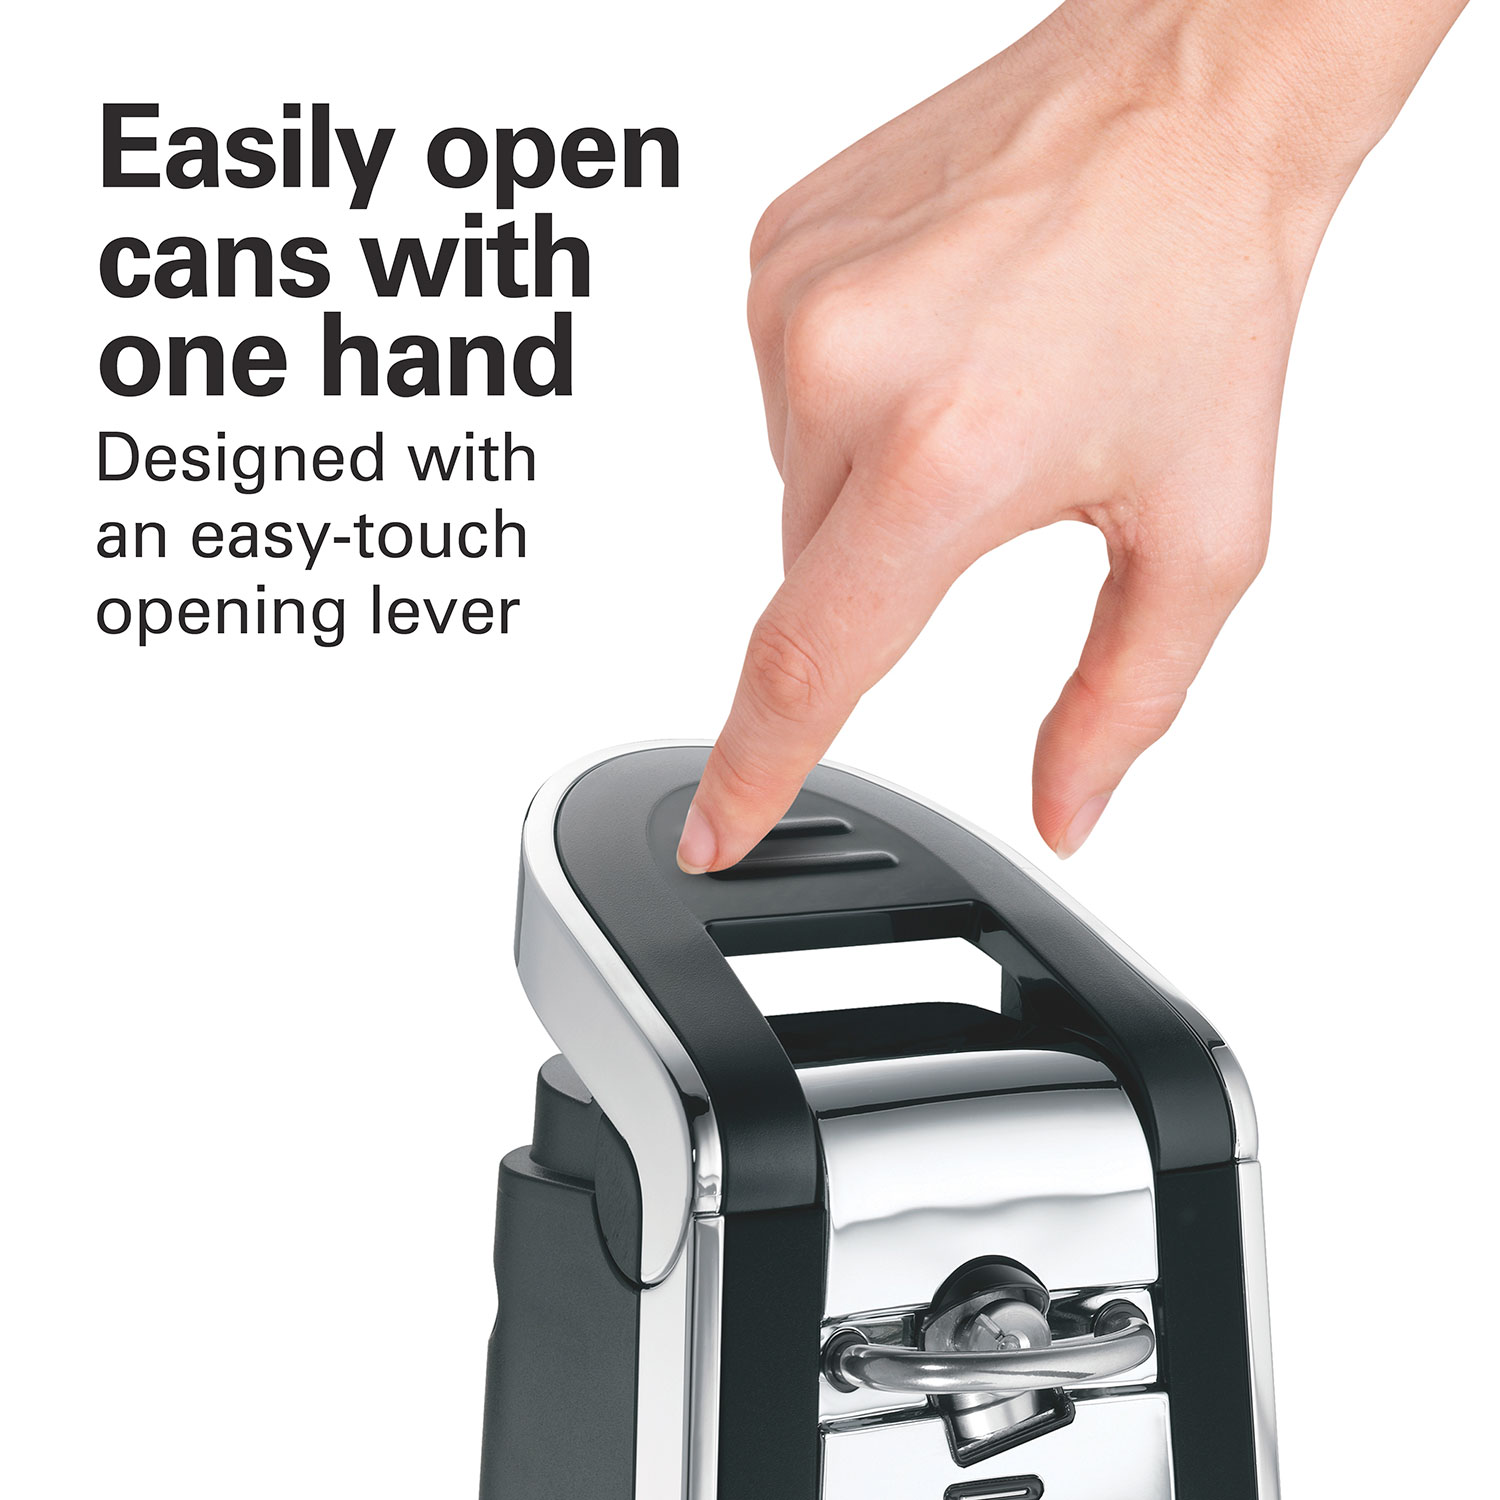 Hamilton Beach Smooth Touch Electric Can Opener Black 76606ZF